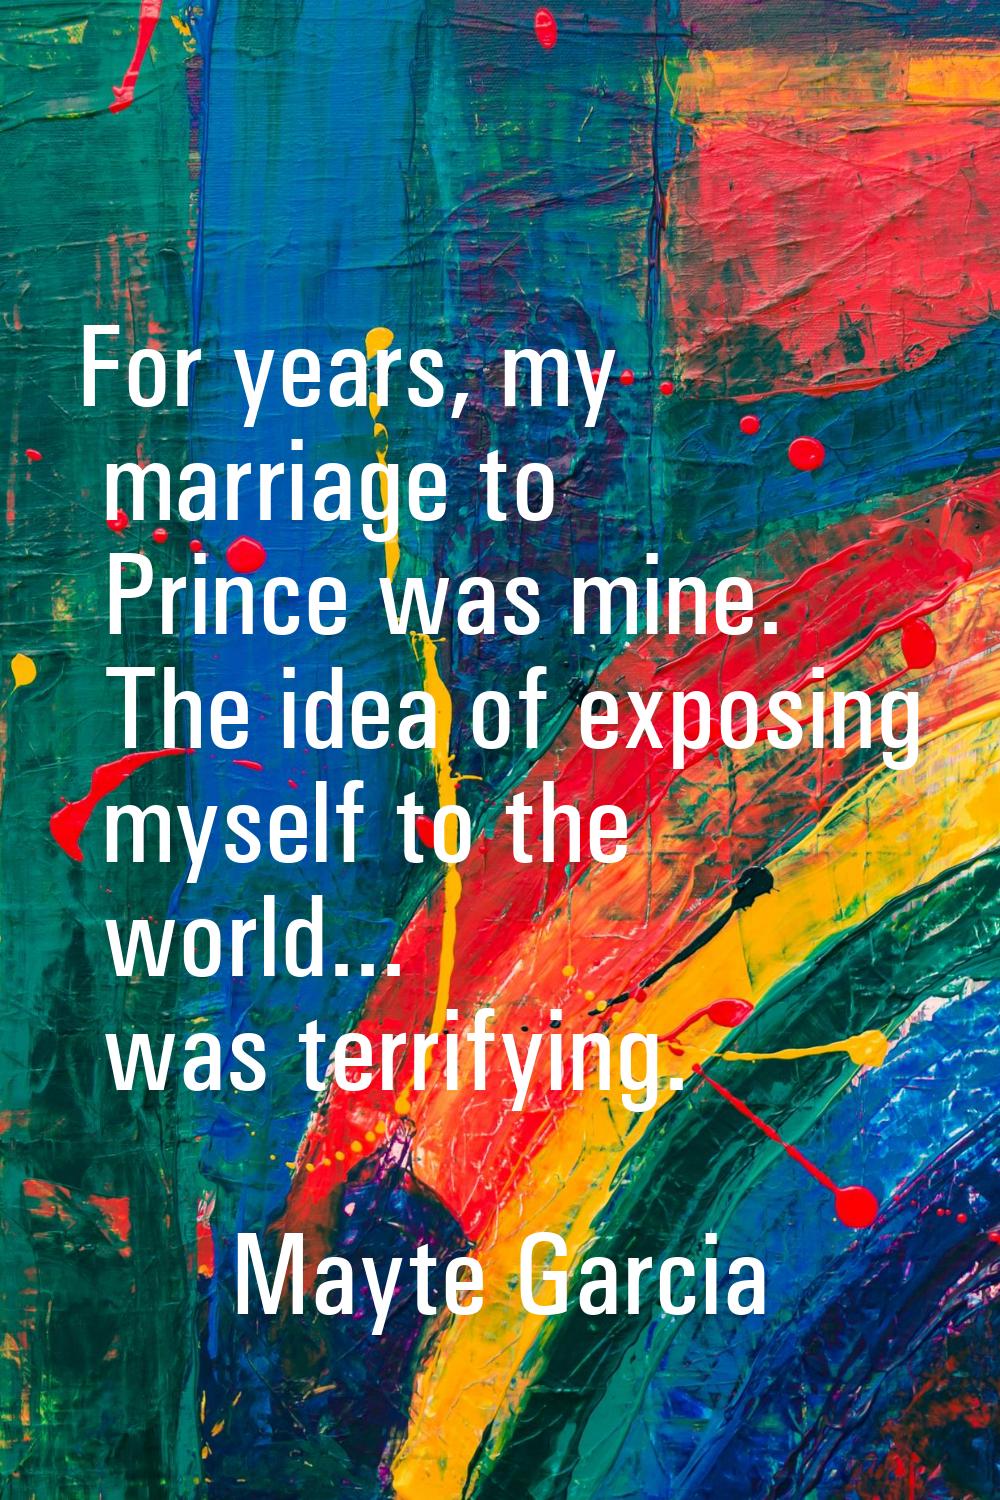 For years, my marriage to Prince was mine. The idea of exposing myself to the world... was terrifyi